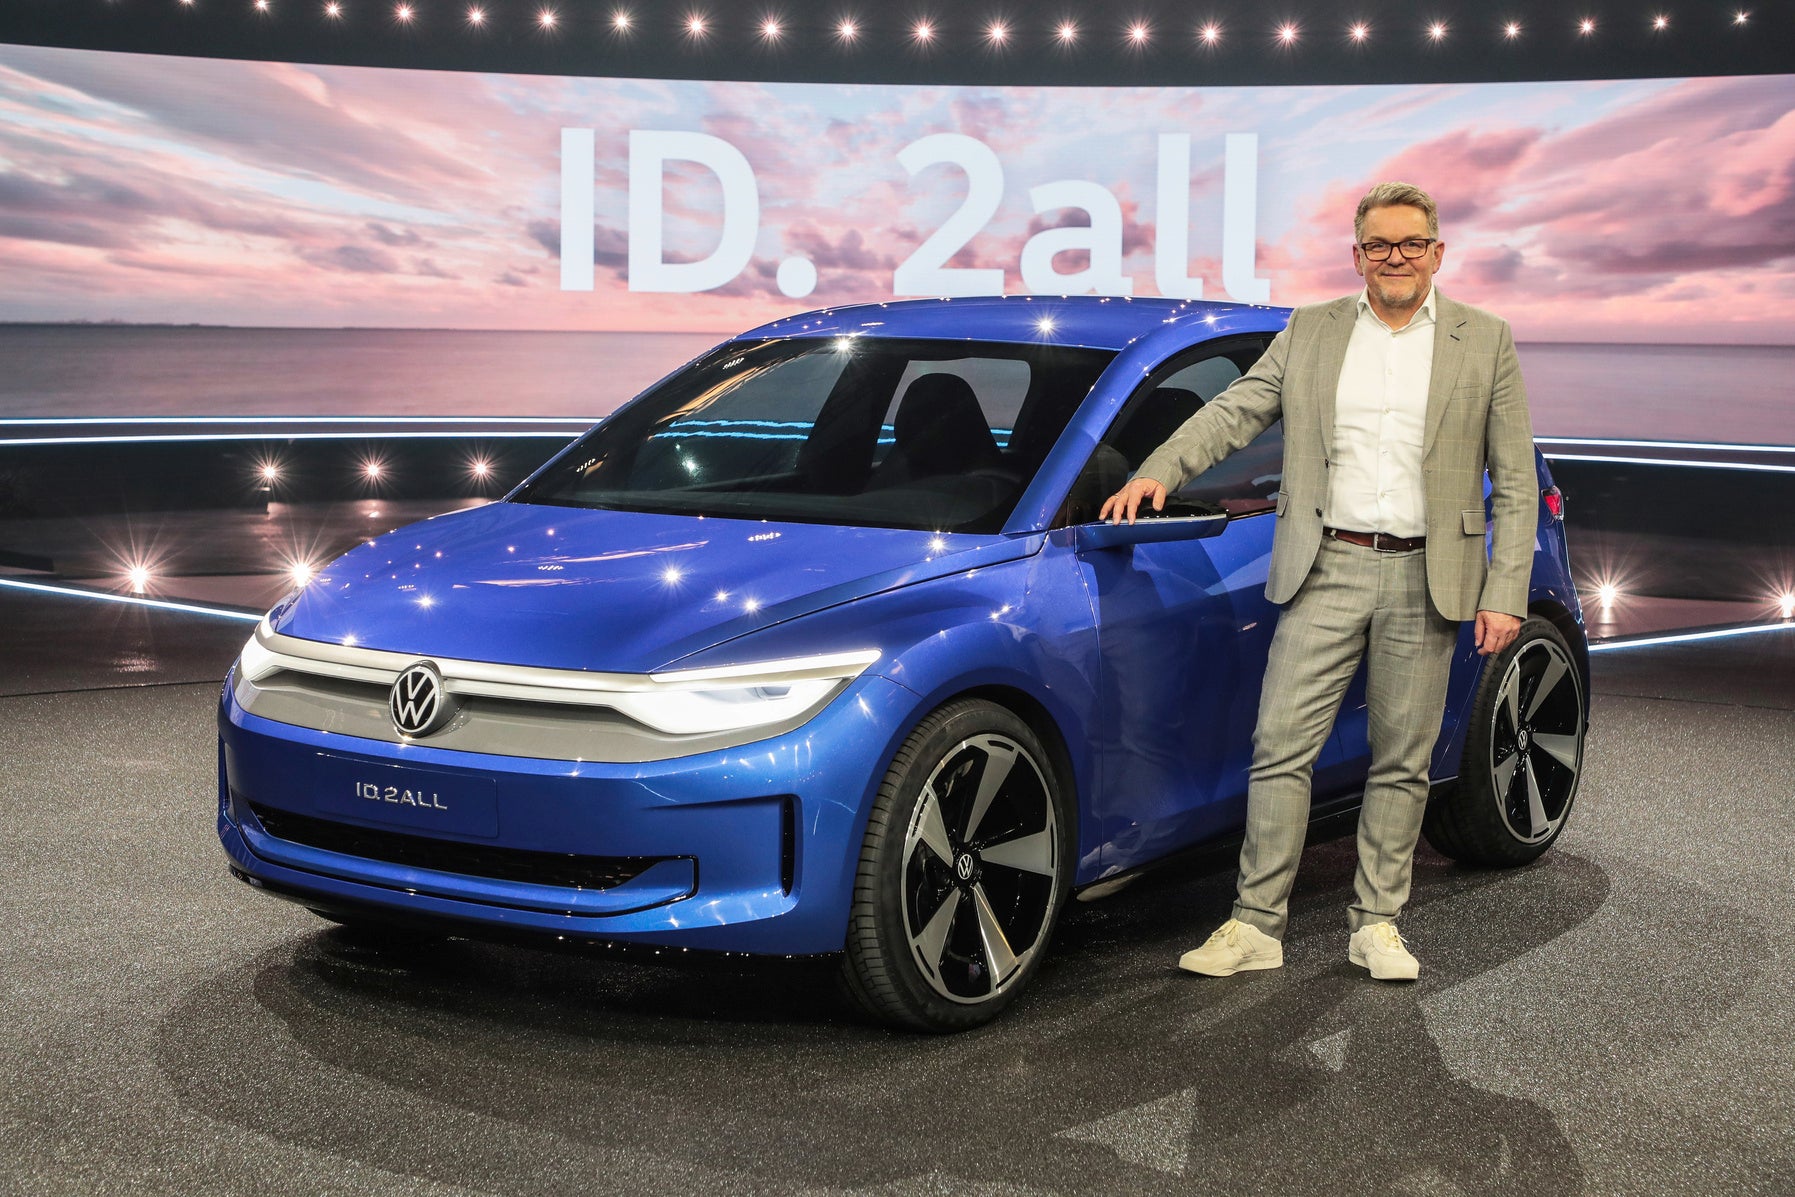 Volkswagen’s ID. 2ALL Concept Is a $26,000 EV Hatchback You’d Acutally Want to Drive